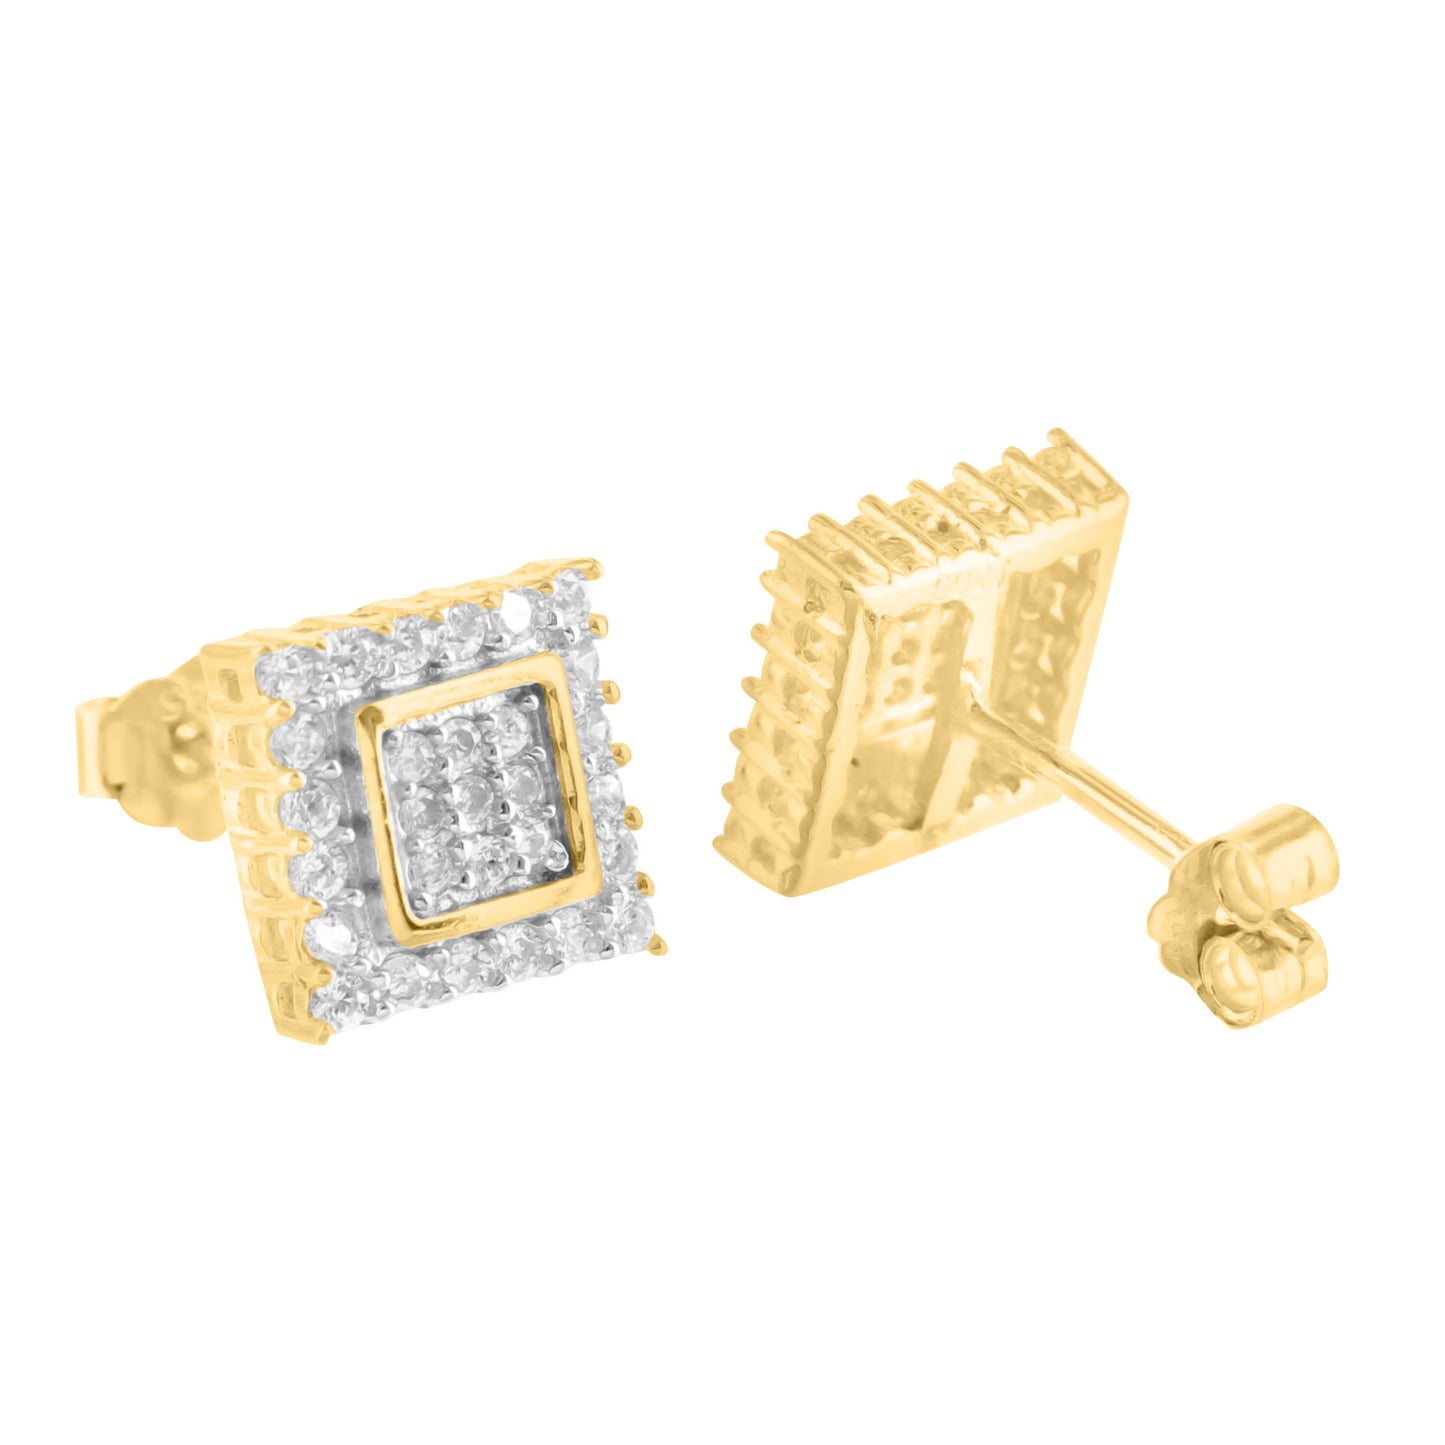 Yellow Gold Finish Lab Diamond Square 925 Real Silver Earrings